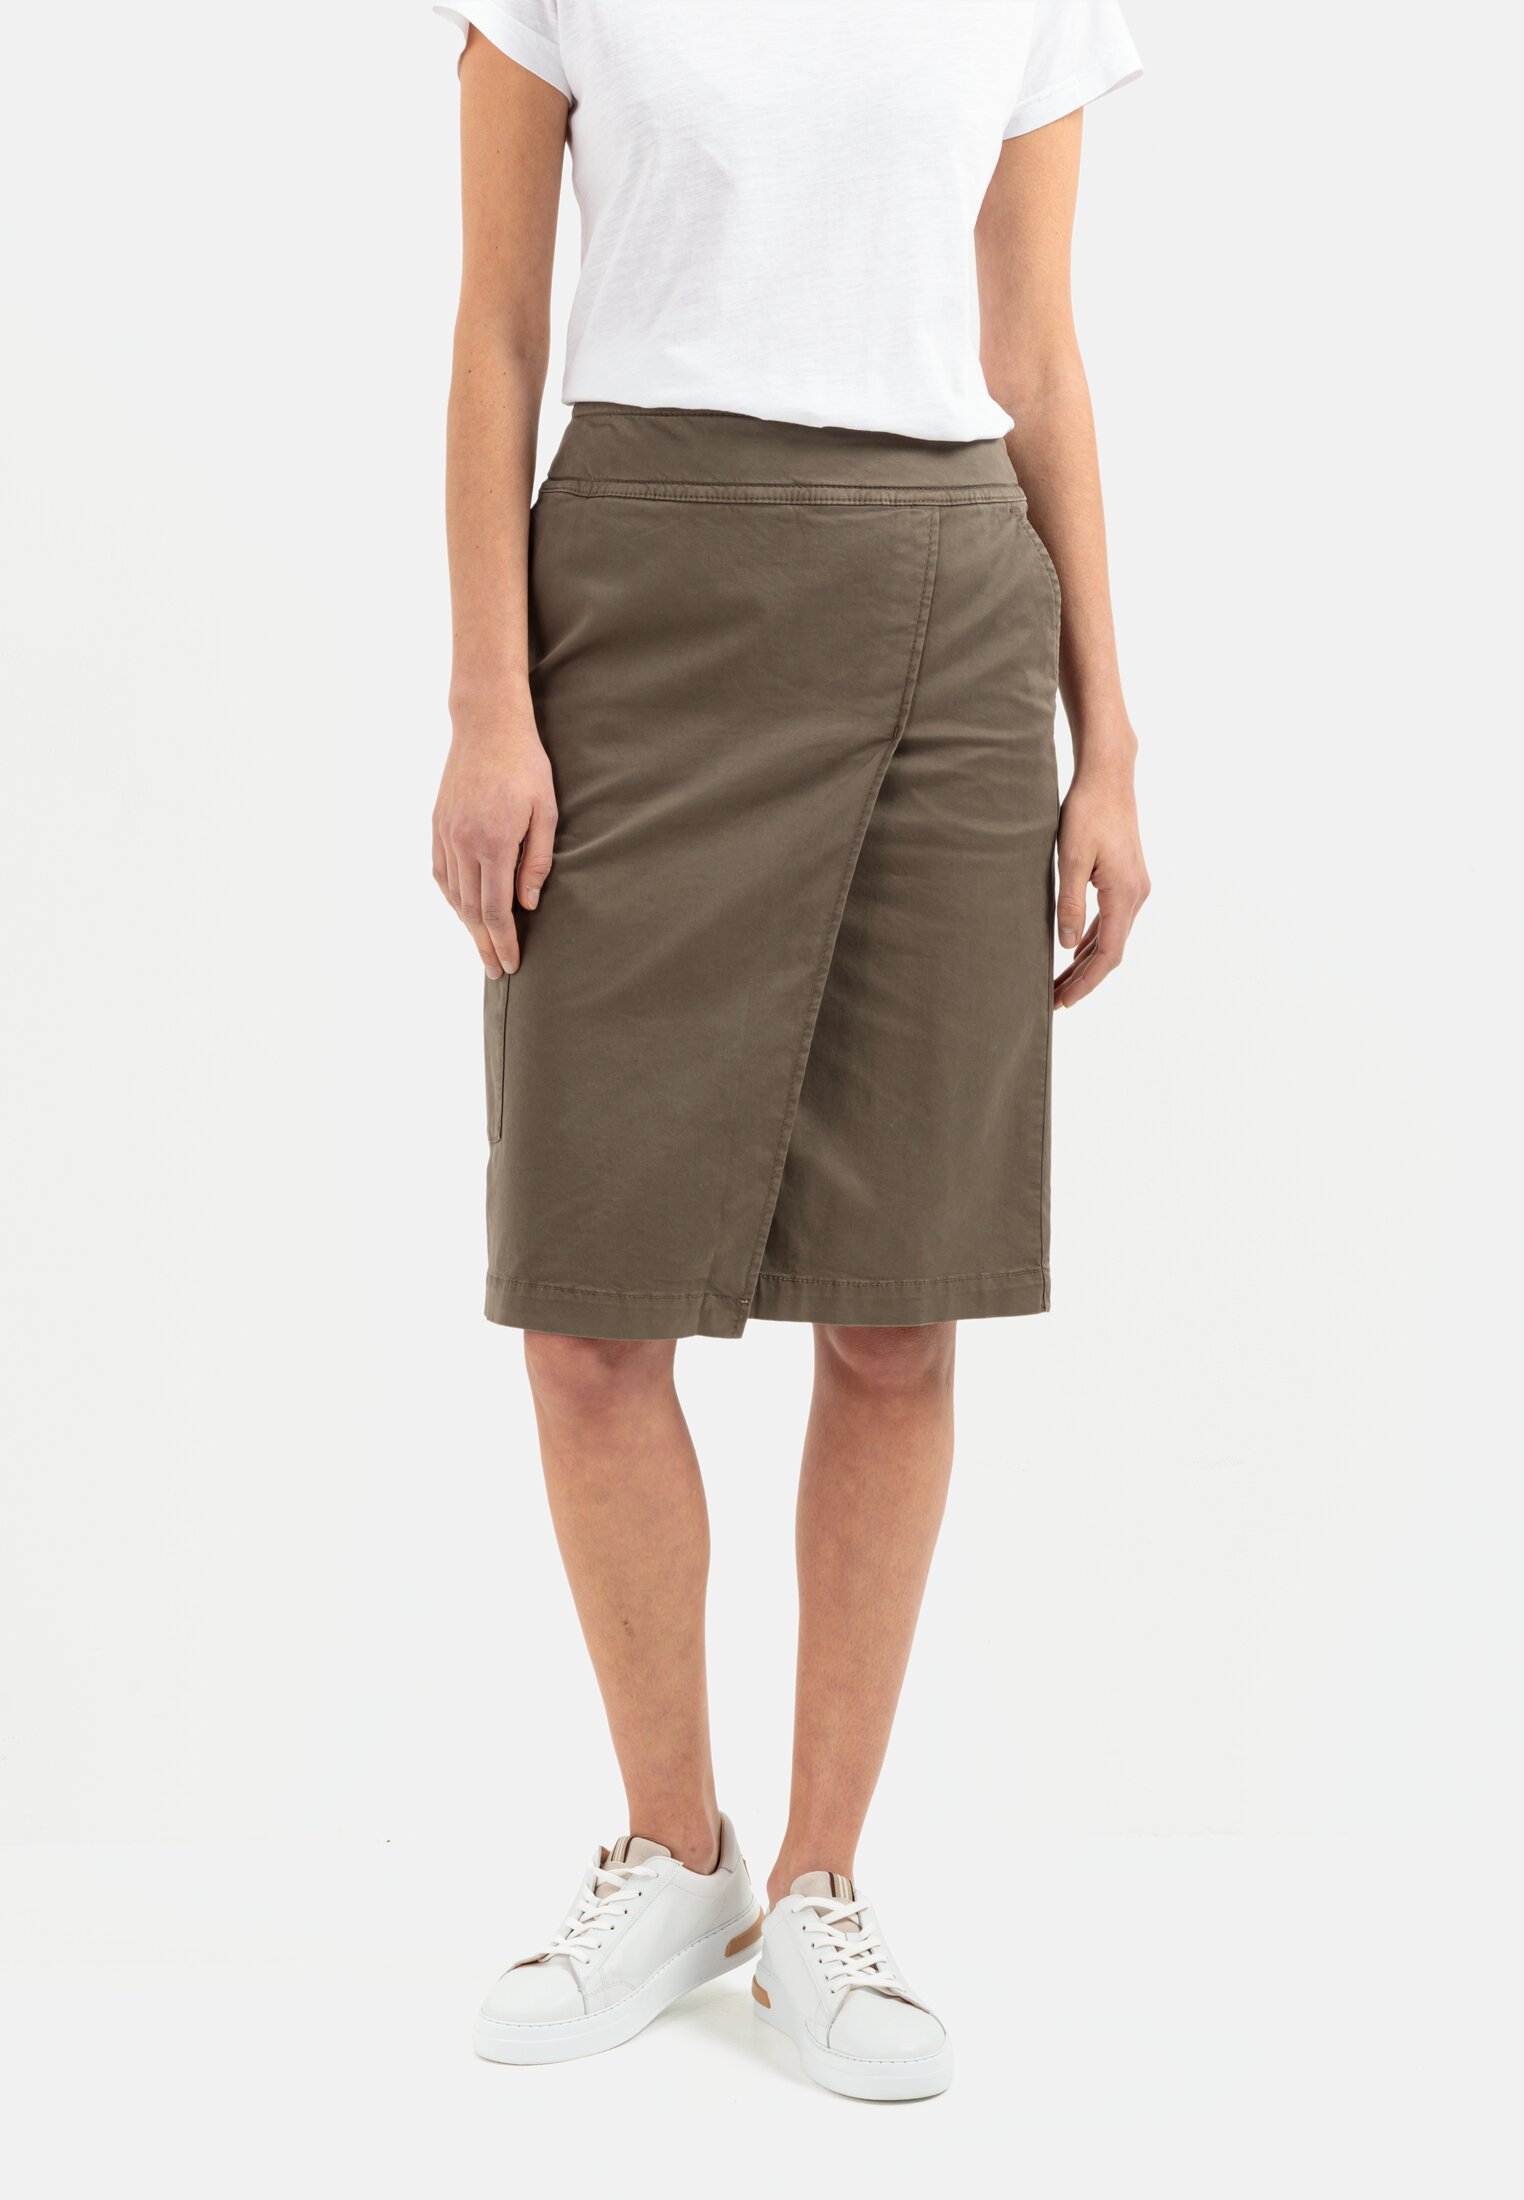 Camel Active Pencil Skirt with front slit